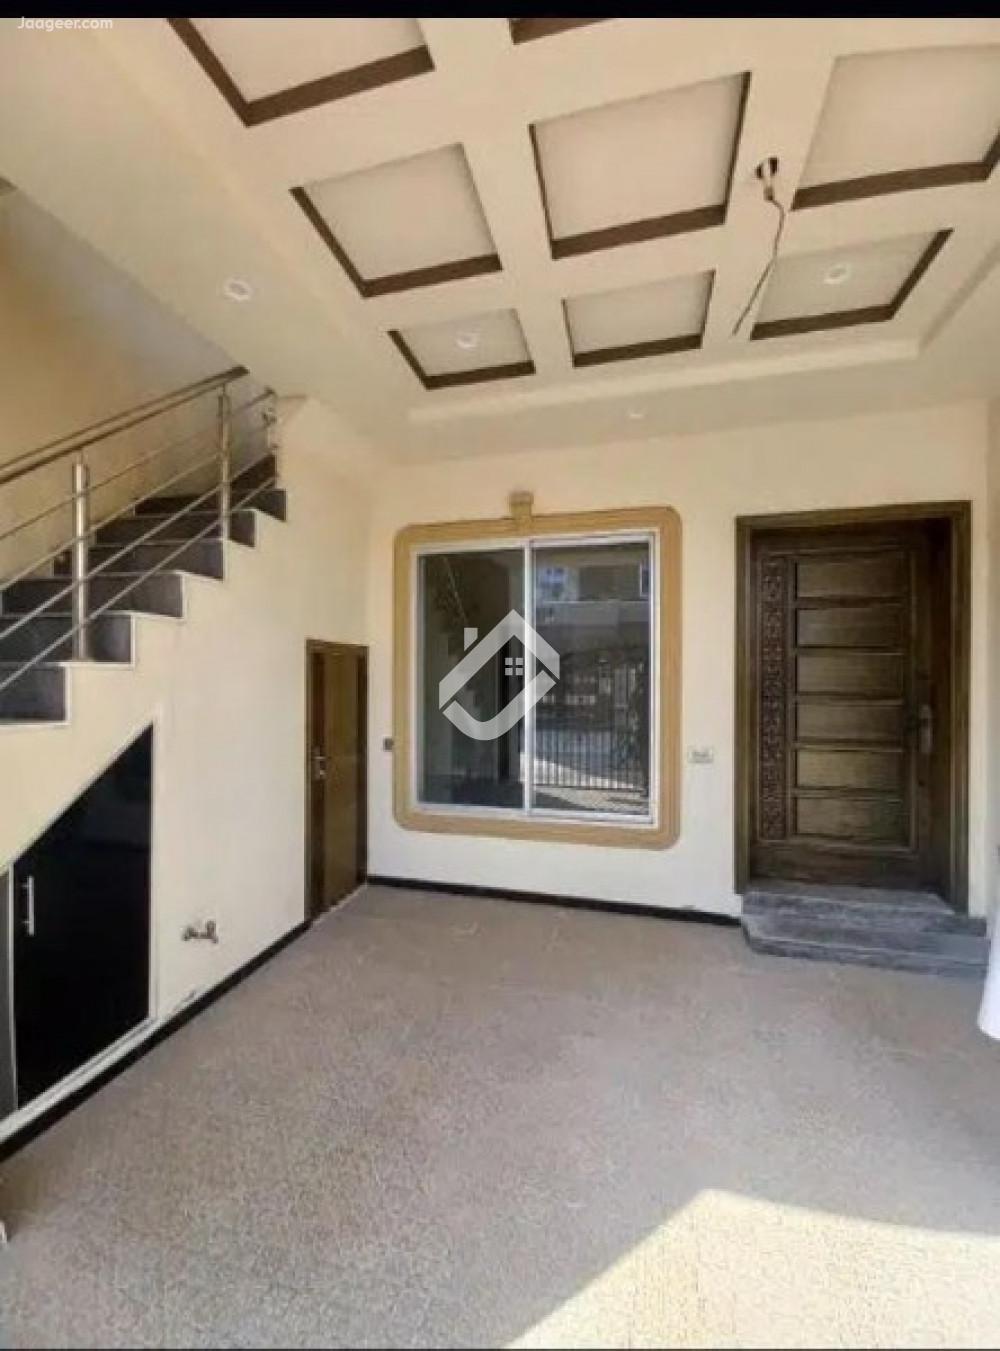 View  3.5 Marla Double Storey House For Rent In Khayaban E Naveed  in Khayaban E Naveed, Sargodha